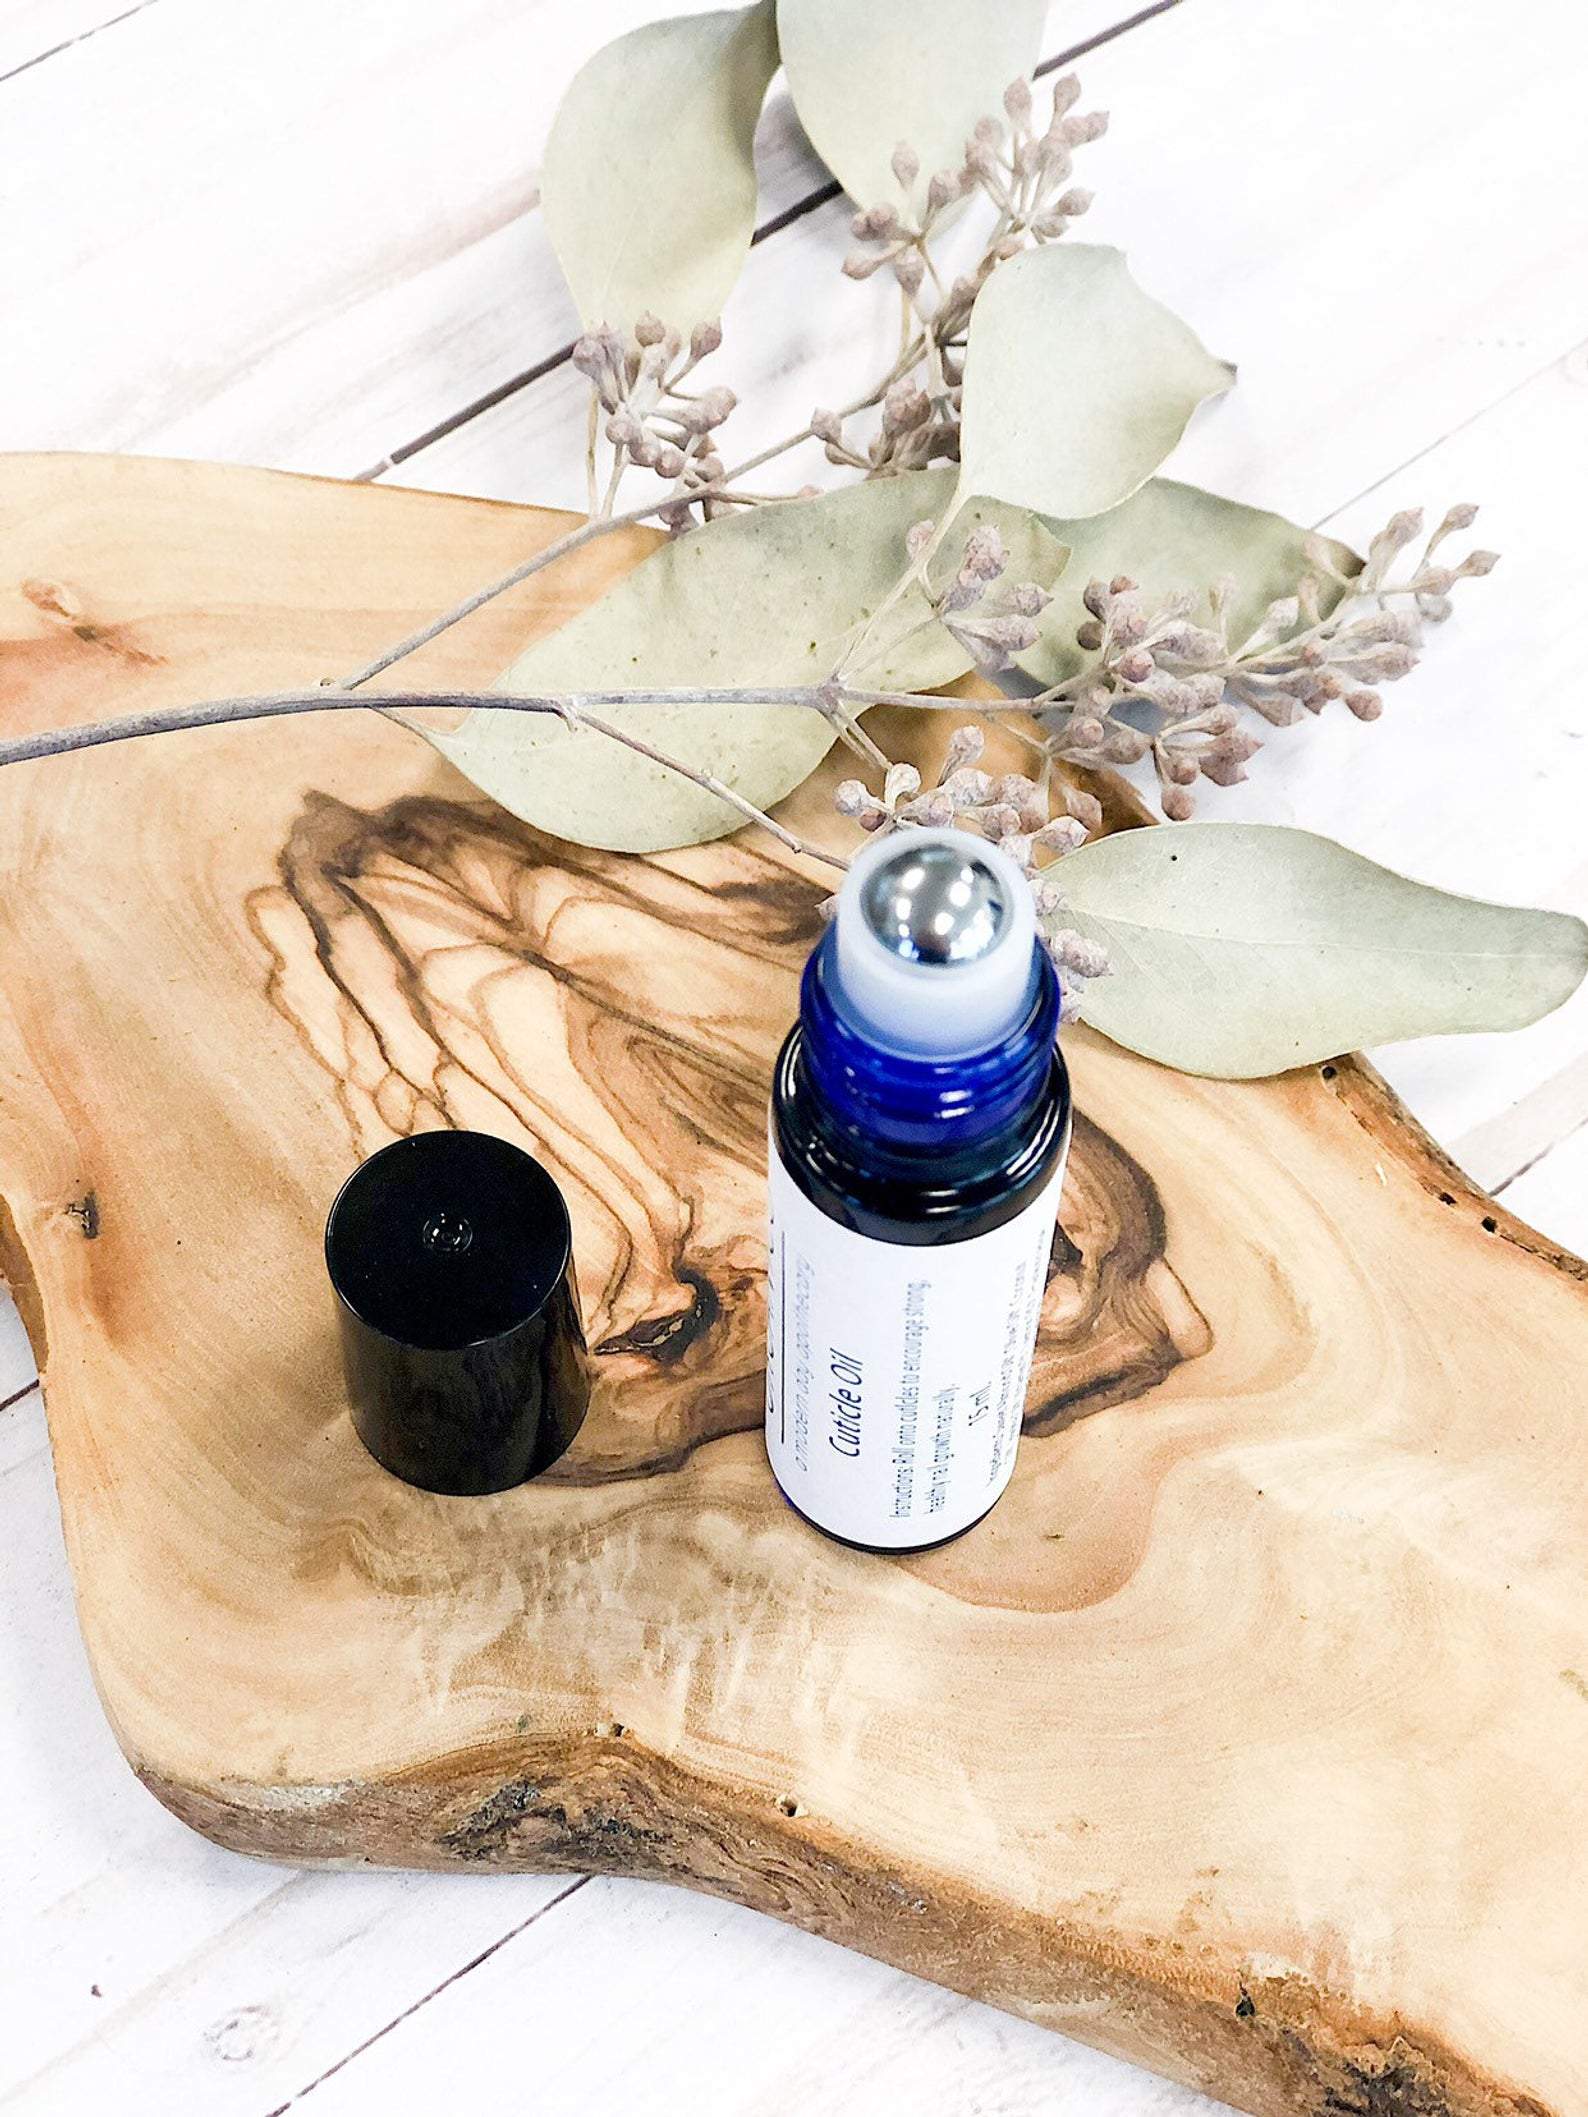 A blue glass roll-on bottle of White Smokey Organic Cuticle Oil, featuring a black cap next to a eucalyptus branch on a wooden slab with a swirling grain pattern.